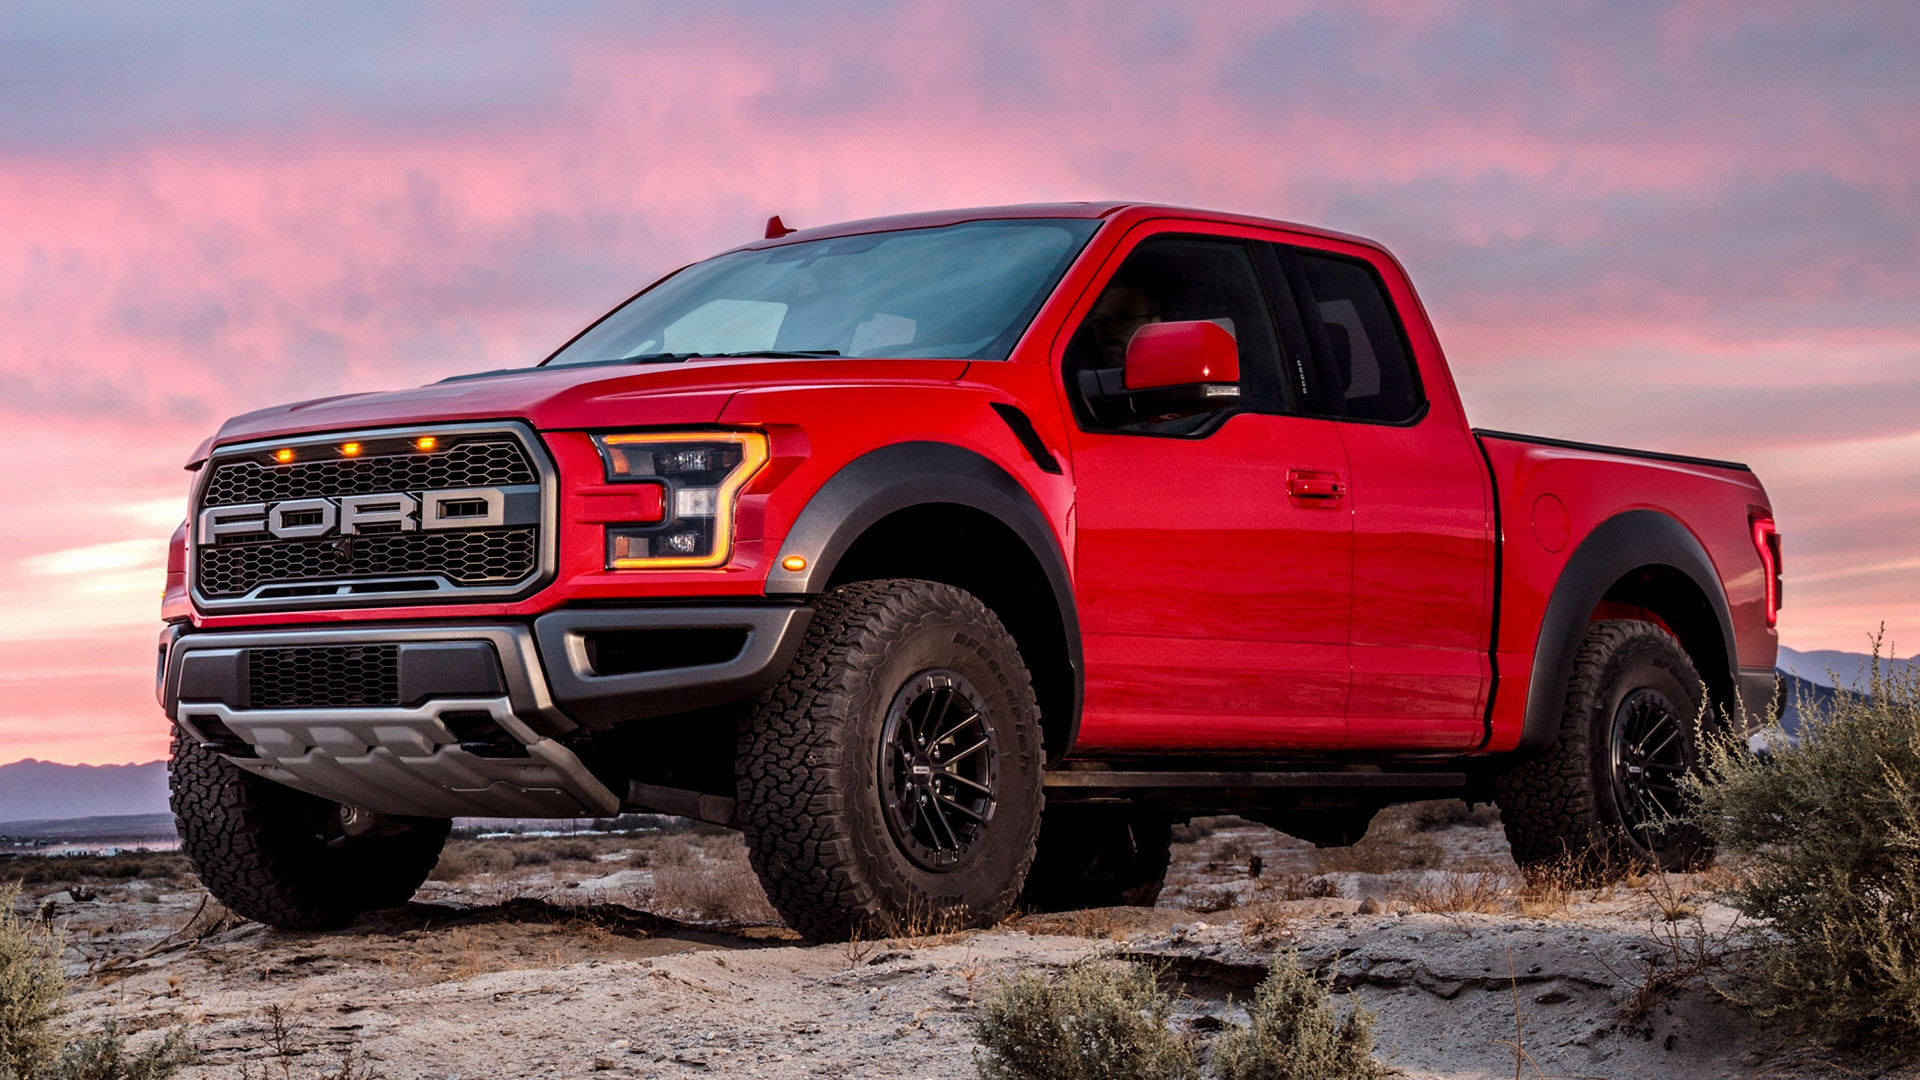 Cool Ford Raptor Wallpapers Posted june 5, 2019 yl computing